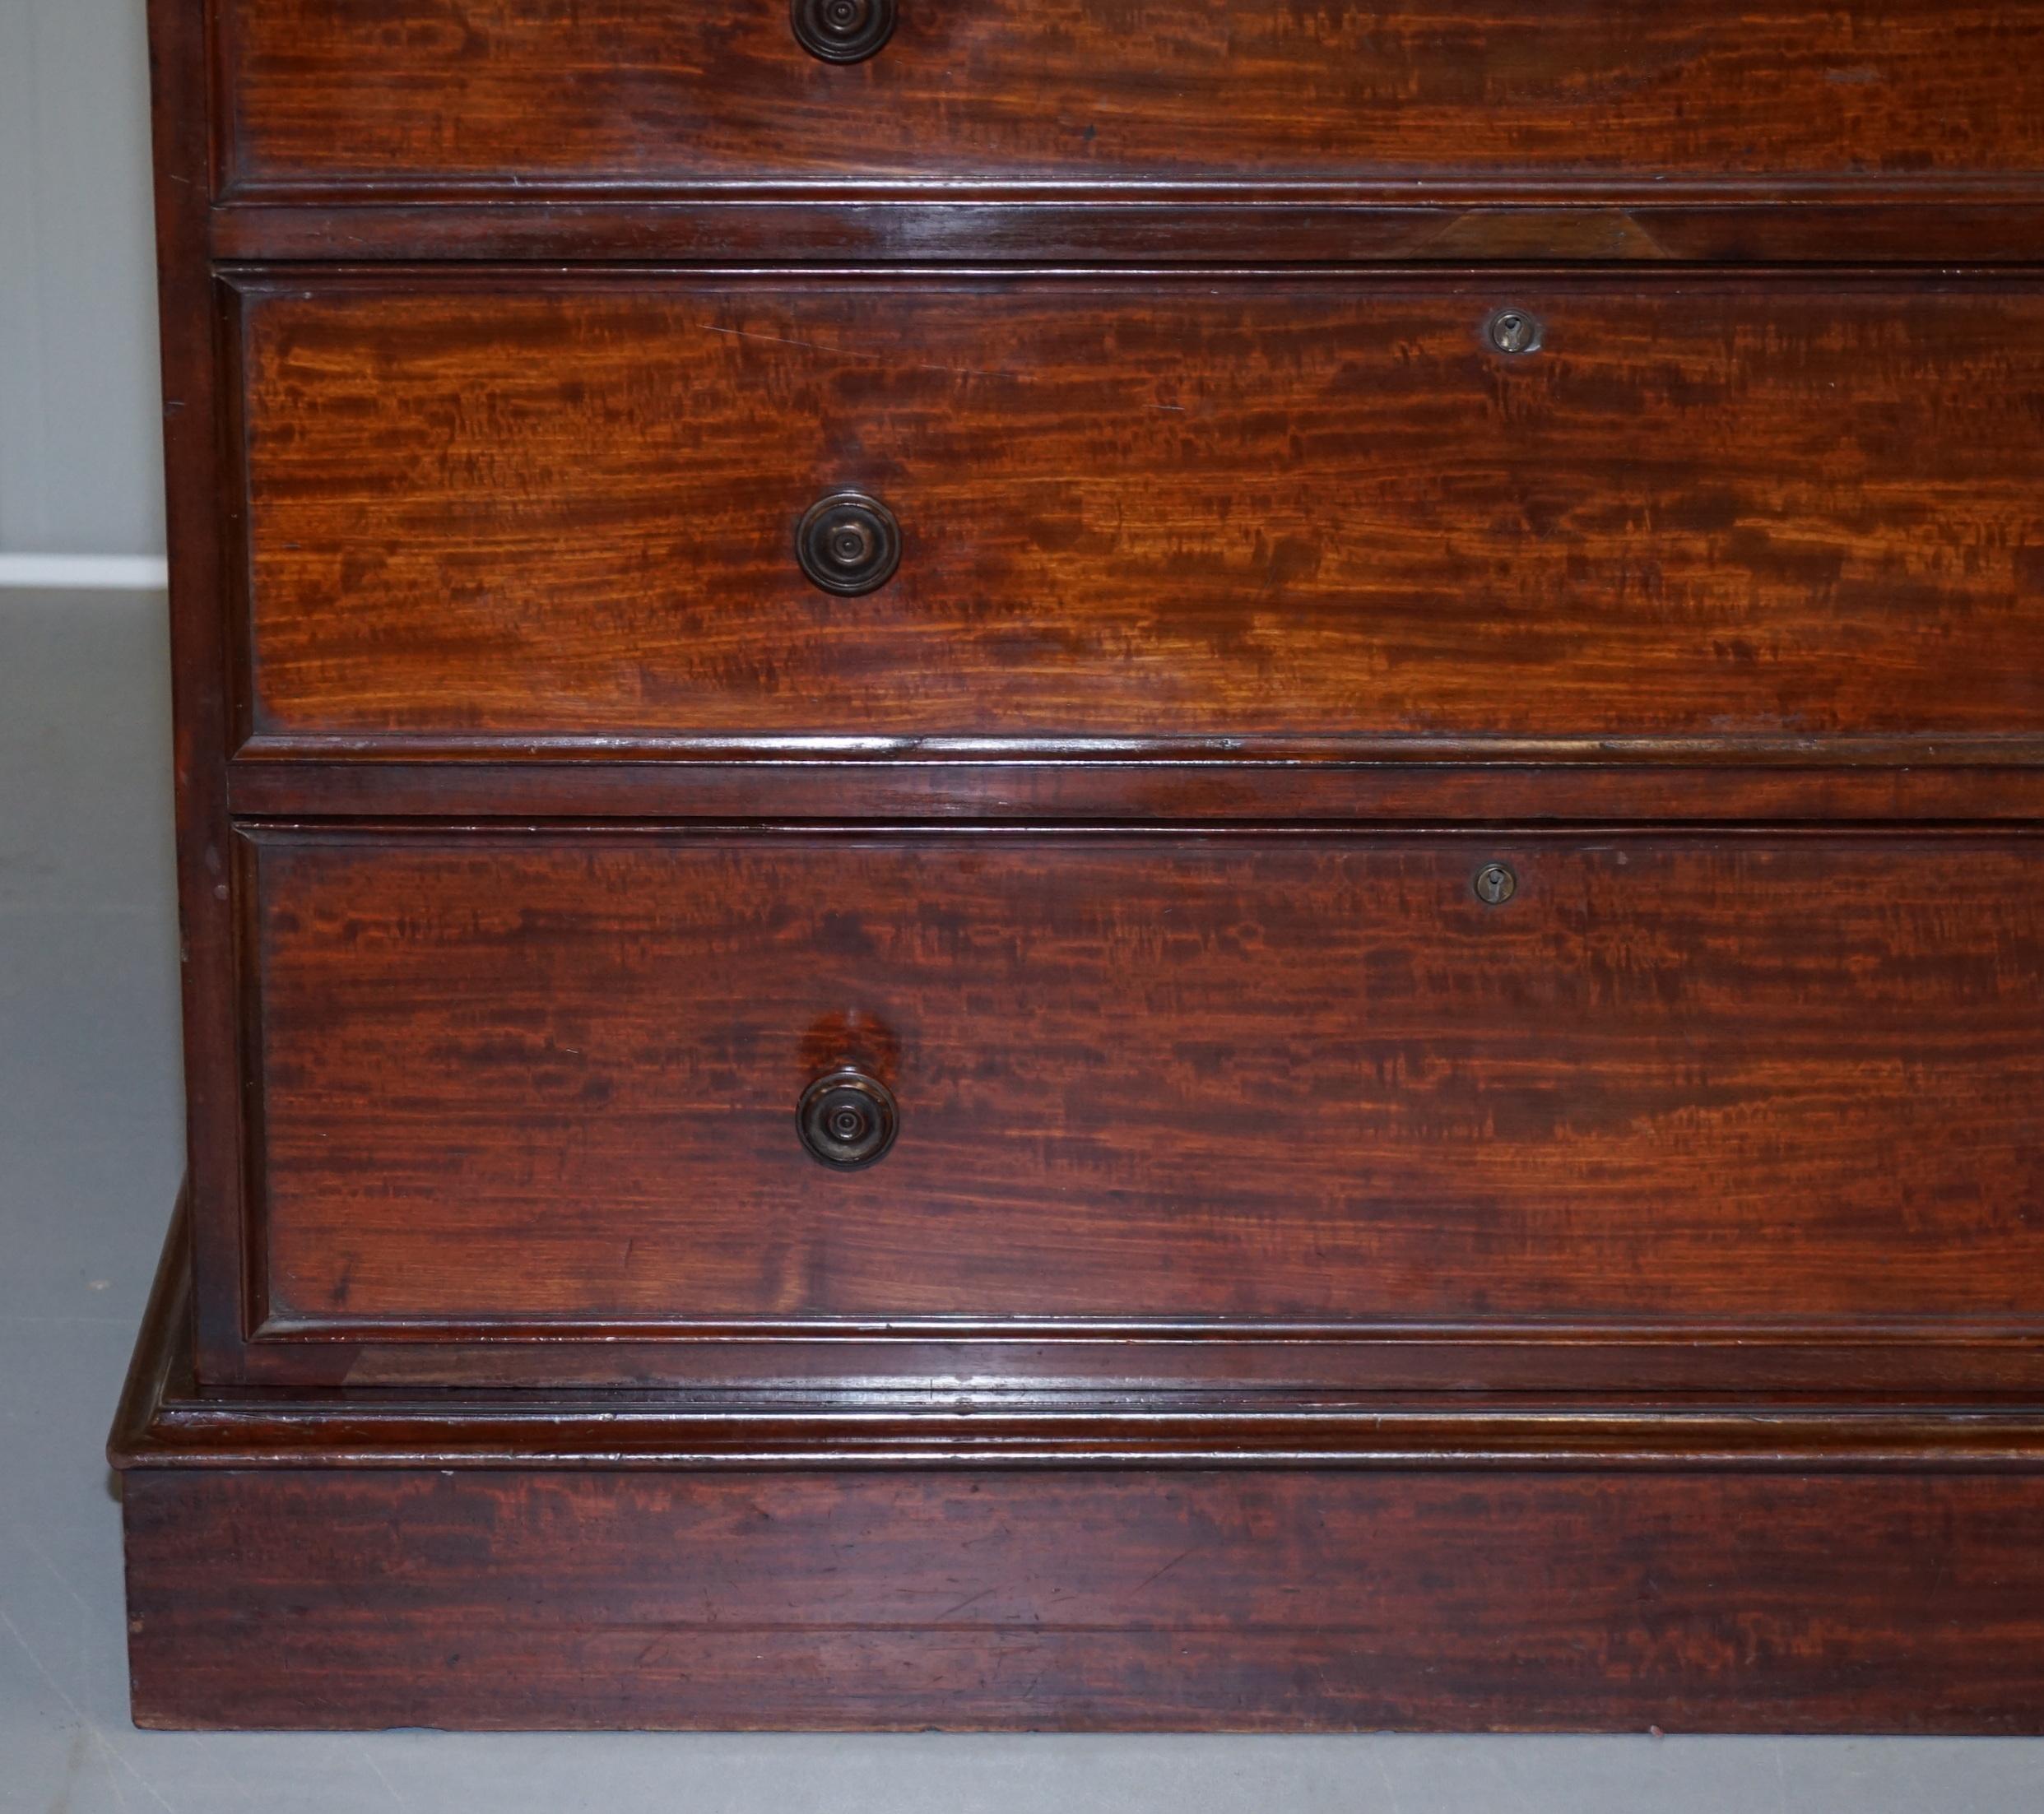 Rare circa 1760 Thomas Wilson 68 Great Queen Street Hardwood Chest of Drawers For Sale 3